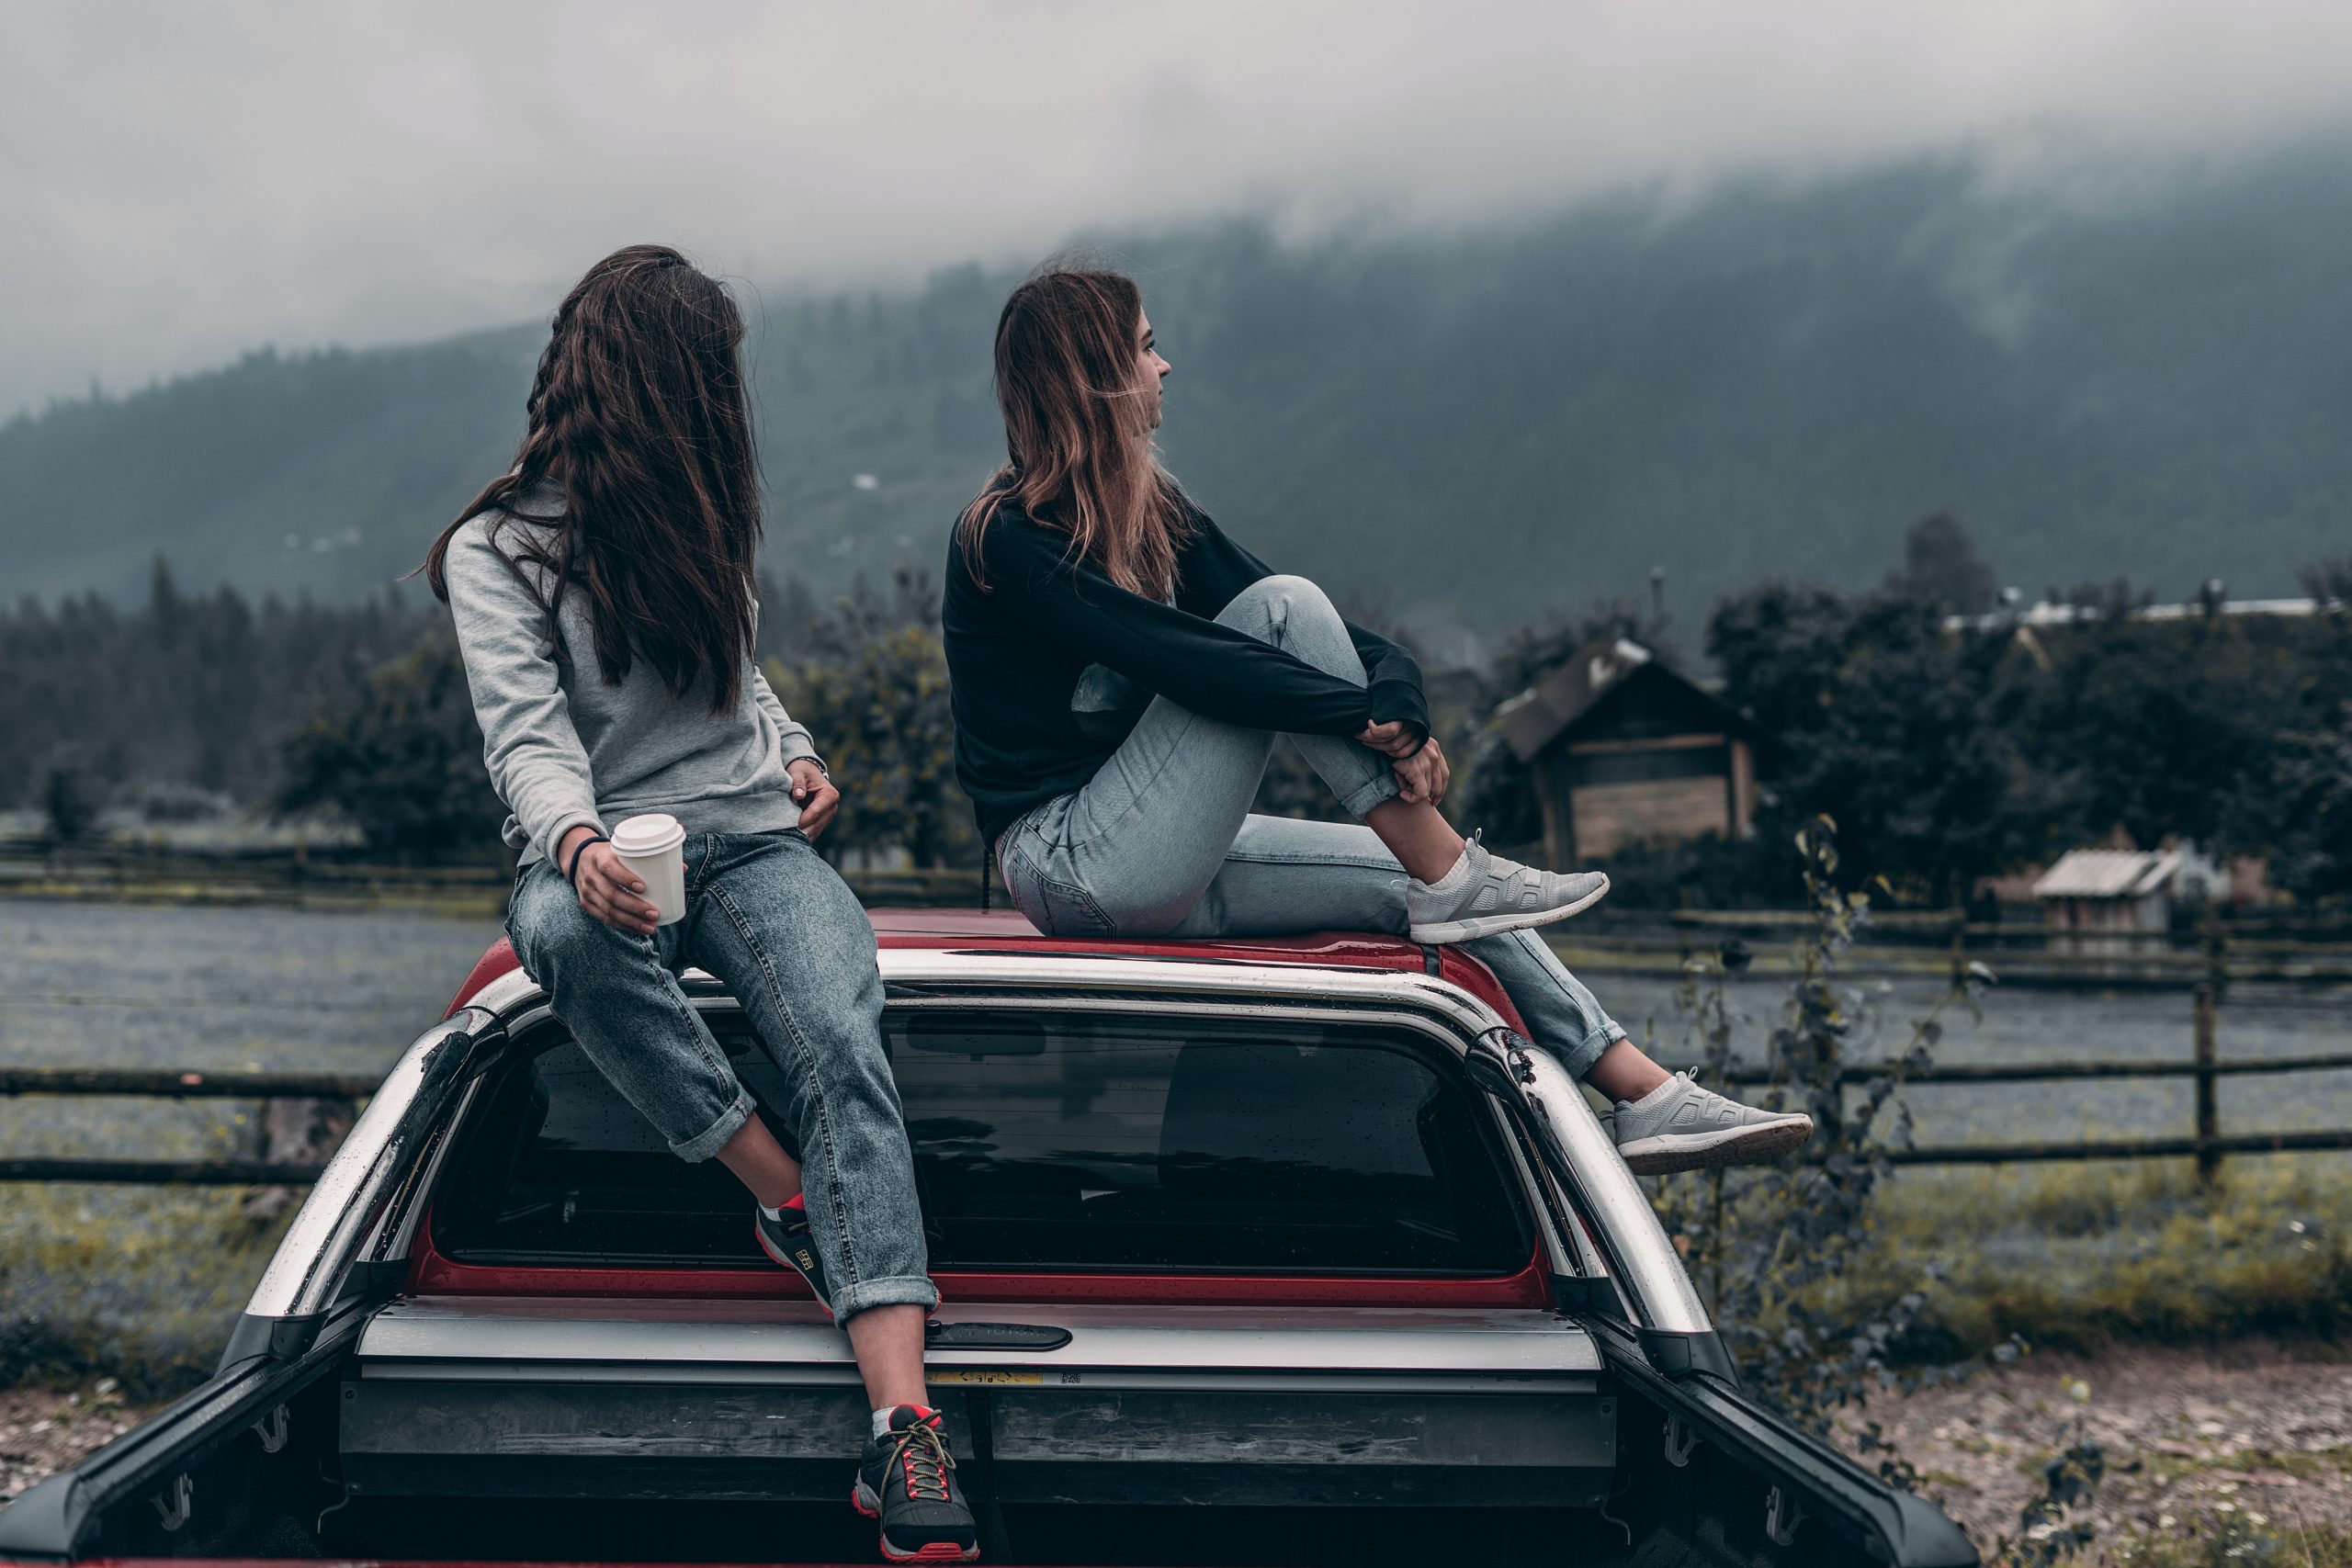 Two women sit on top of a car. One woman looks at the other, but the other woman looks away.